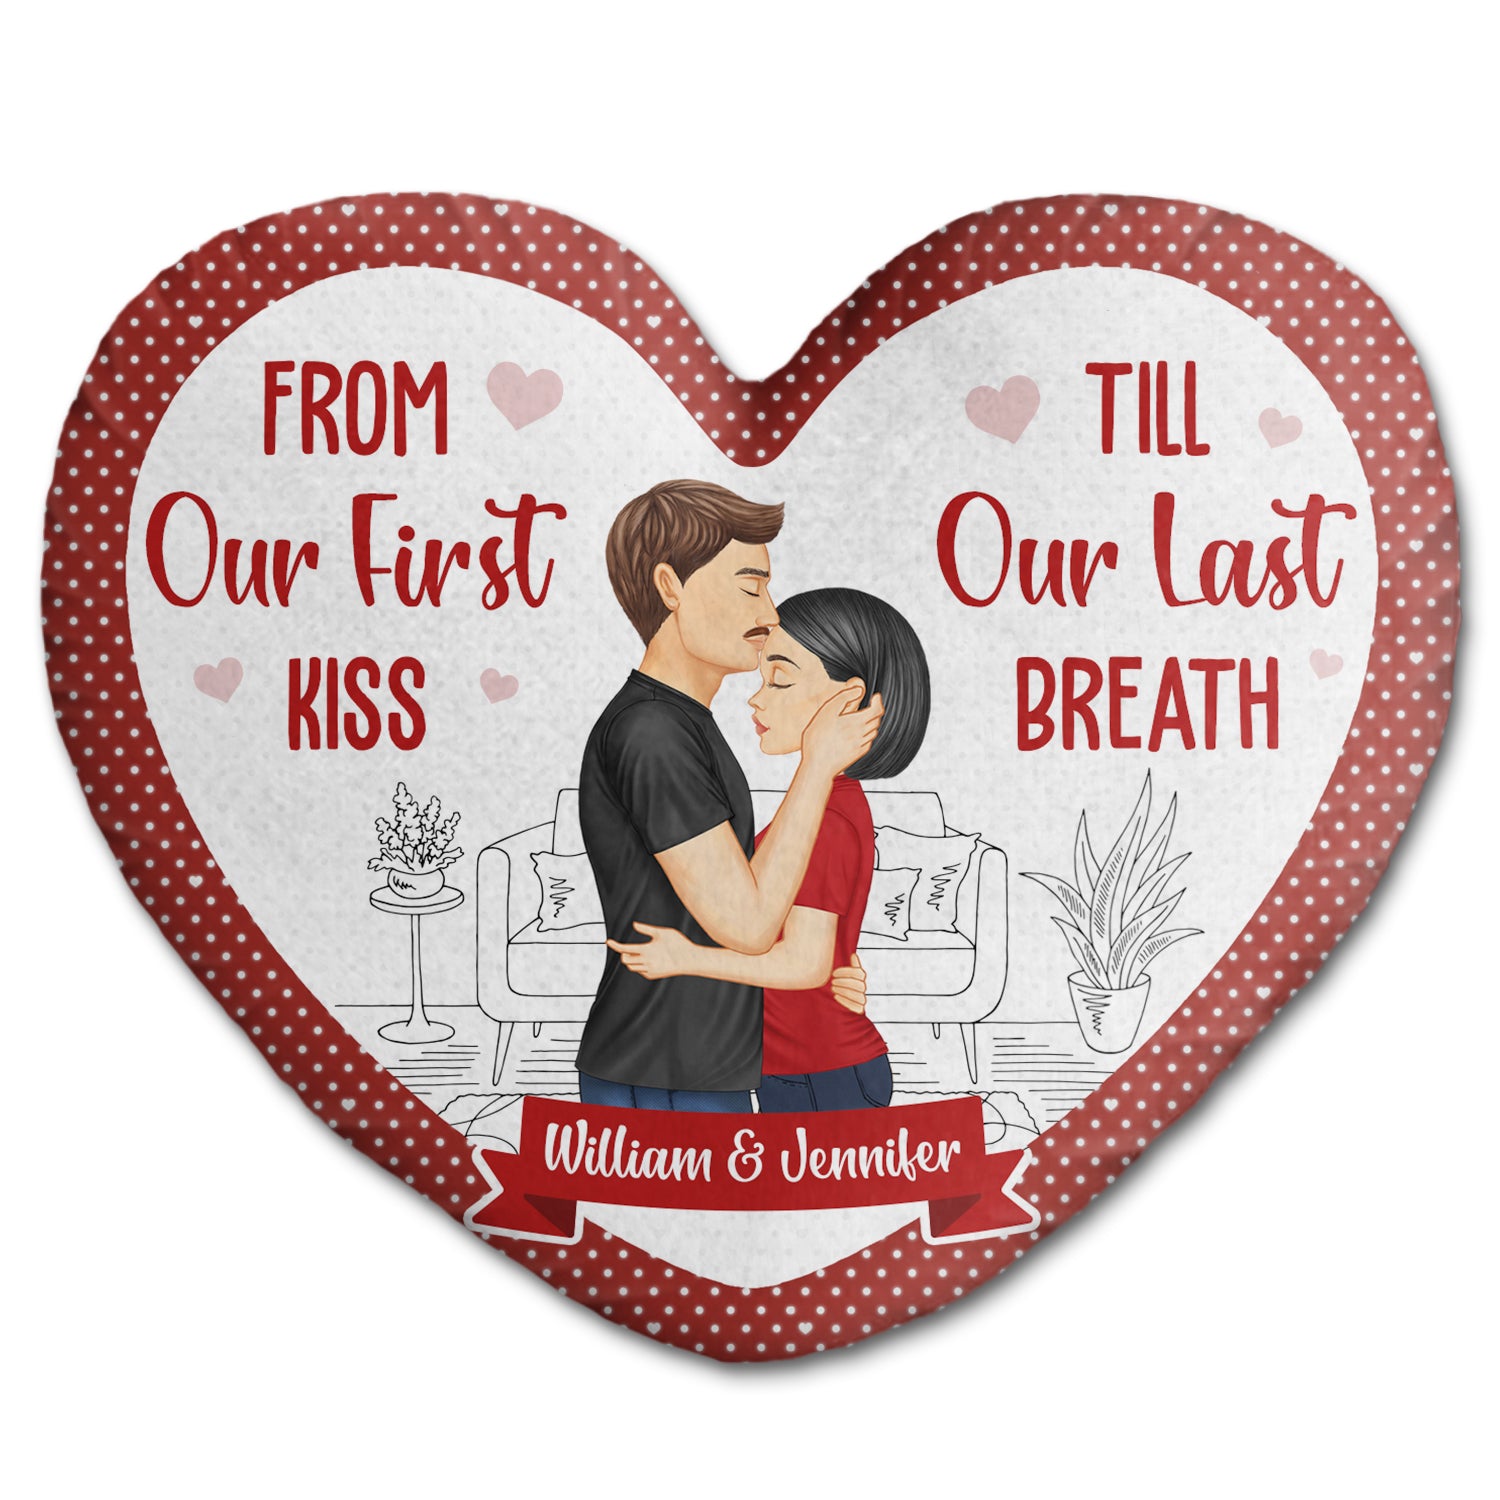 From Our First Kiss Till Our Last Breath - Gift For Couples, Husband, Wife - Personalized Heart Shaped Pillow